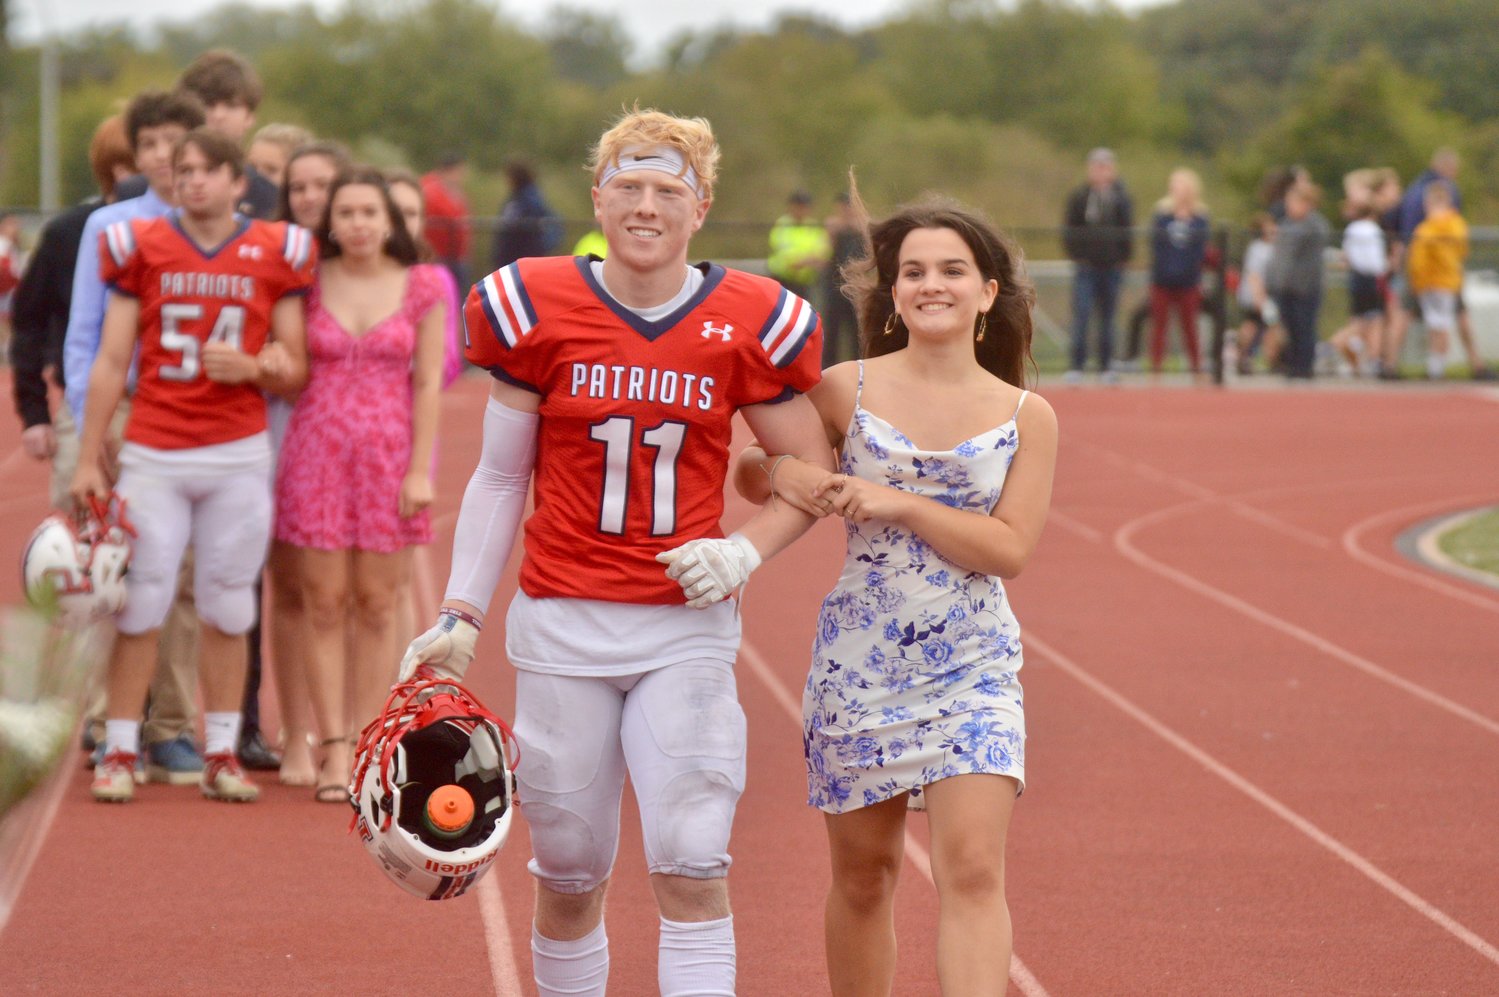 Gavin Bicho and Ruth McKinnon of the Homecoming court are introduced at halftime.